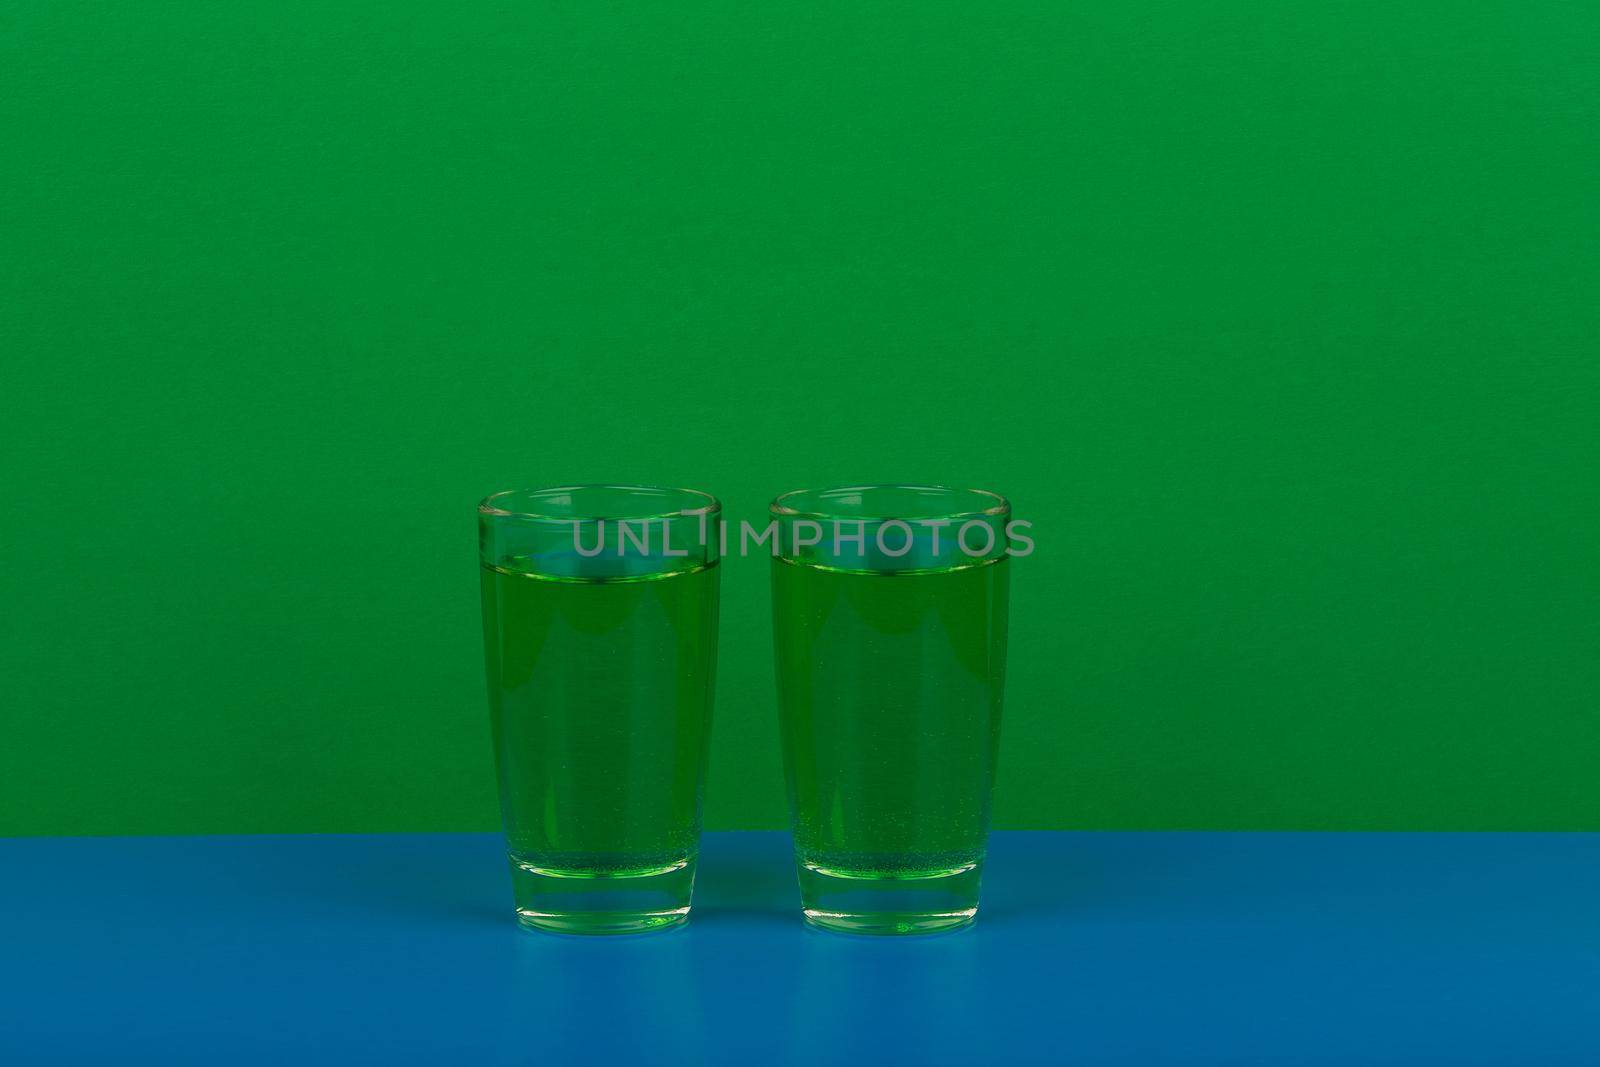 Minimalistic still life with two shot glasses with green drinks in the middle on blue table against green background. Concept of party and alcoholic drinks with peppermint, lime or apples